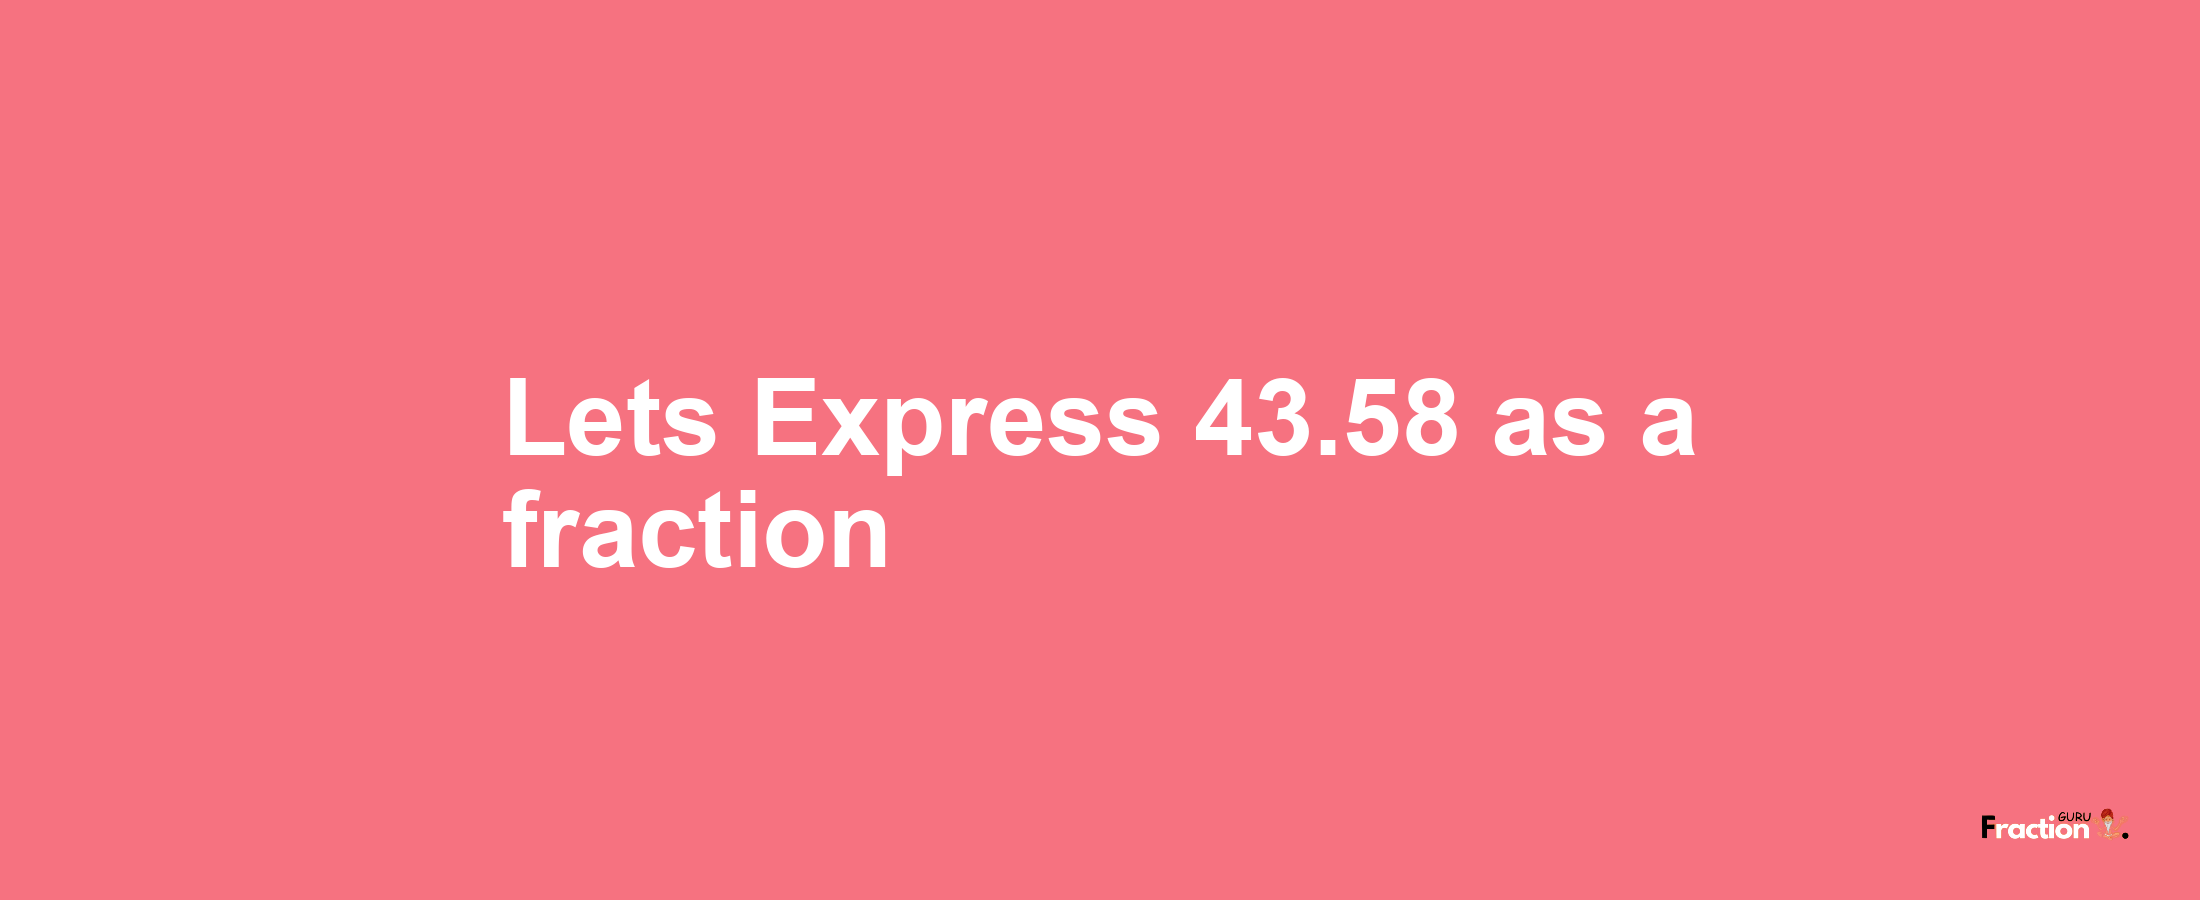 Lets Express 43.58 as afraction